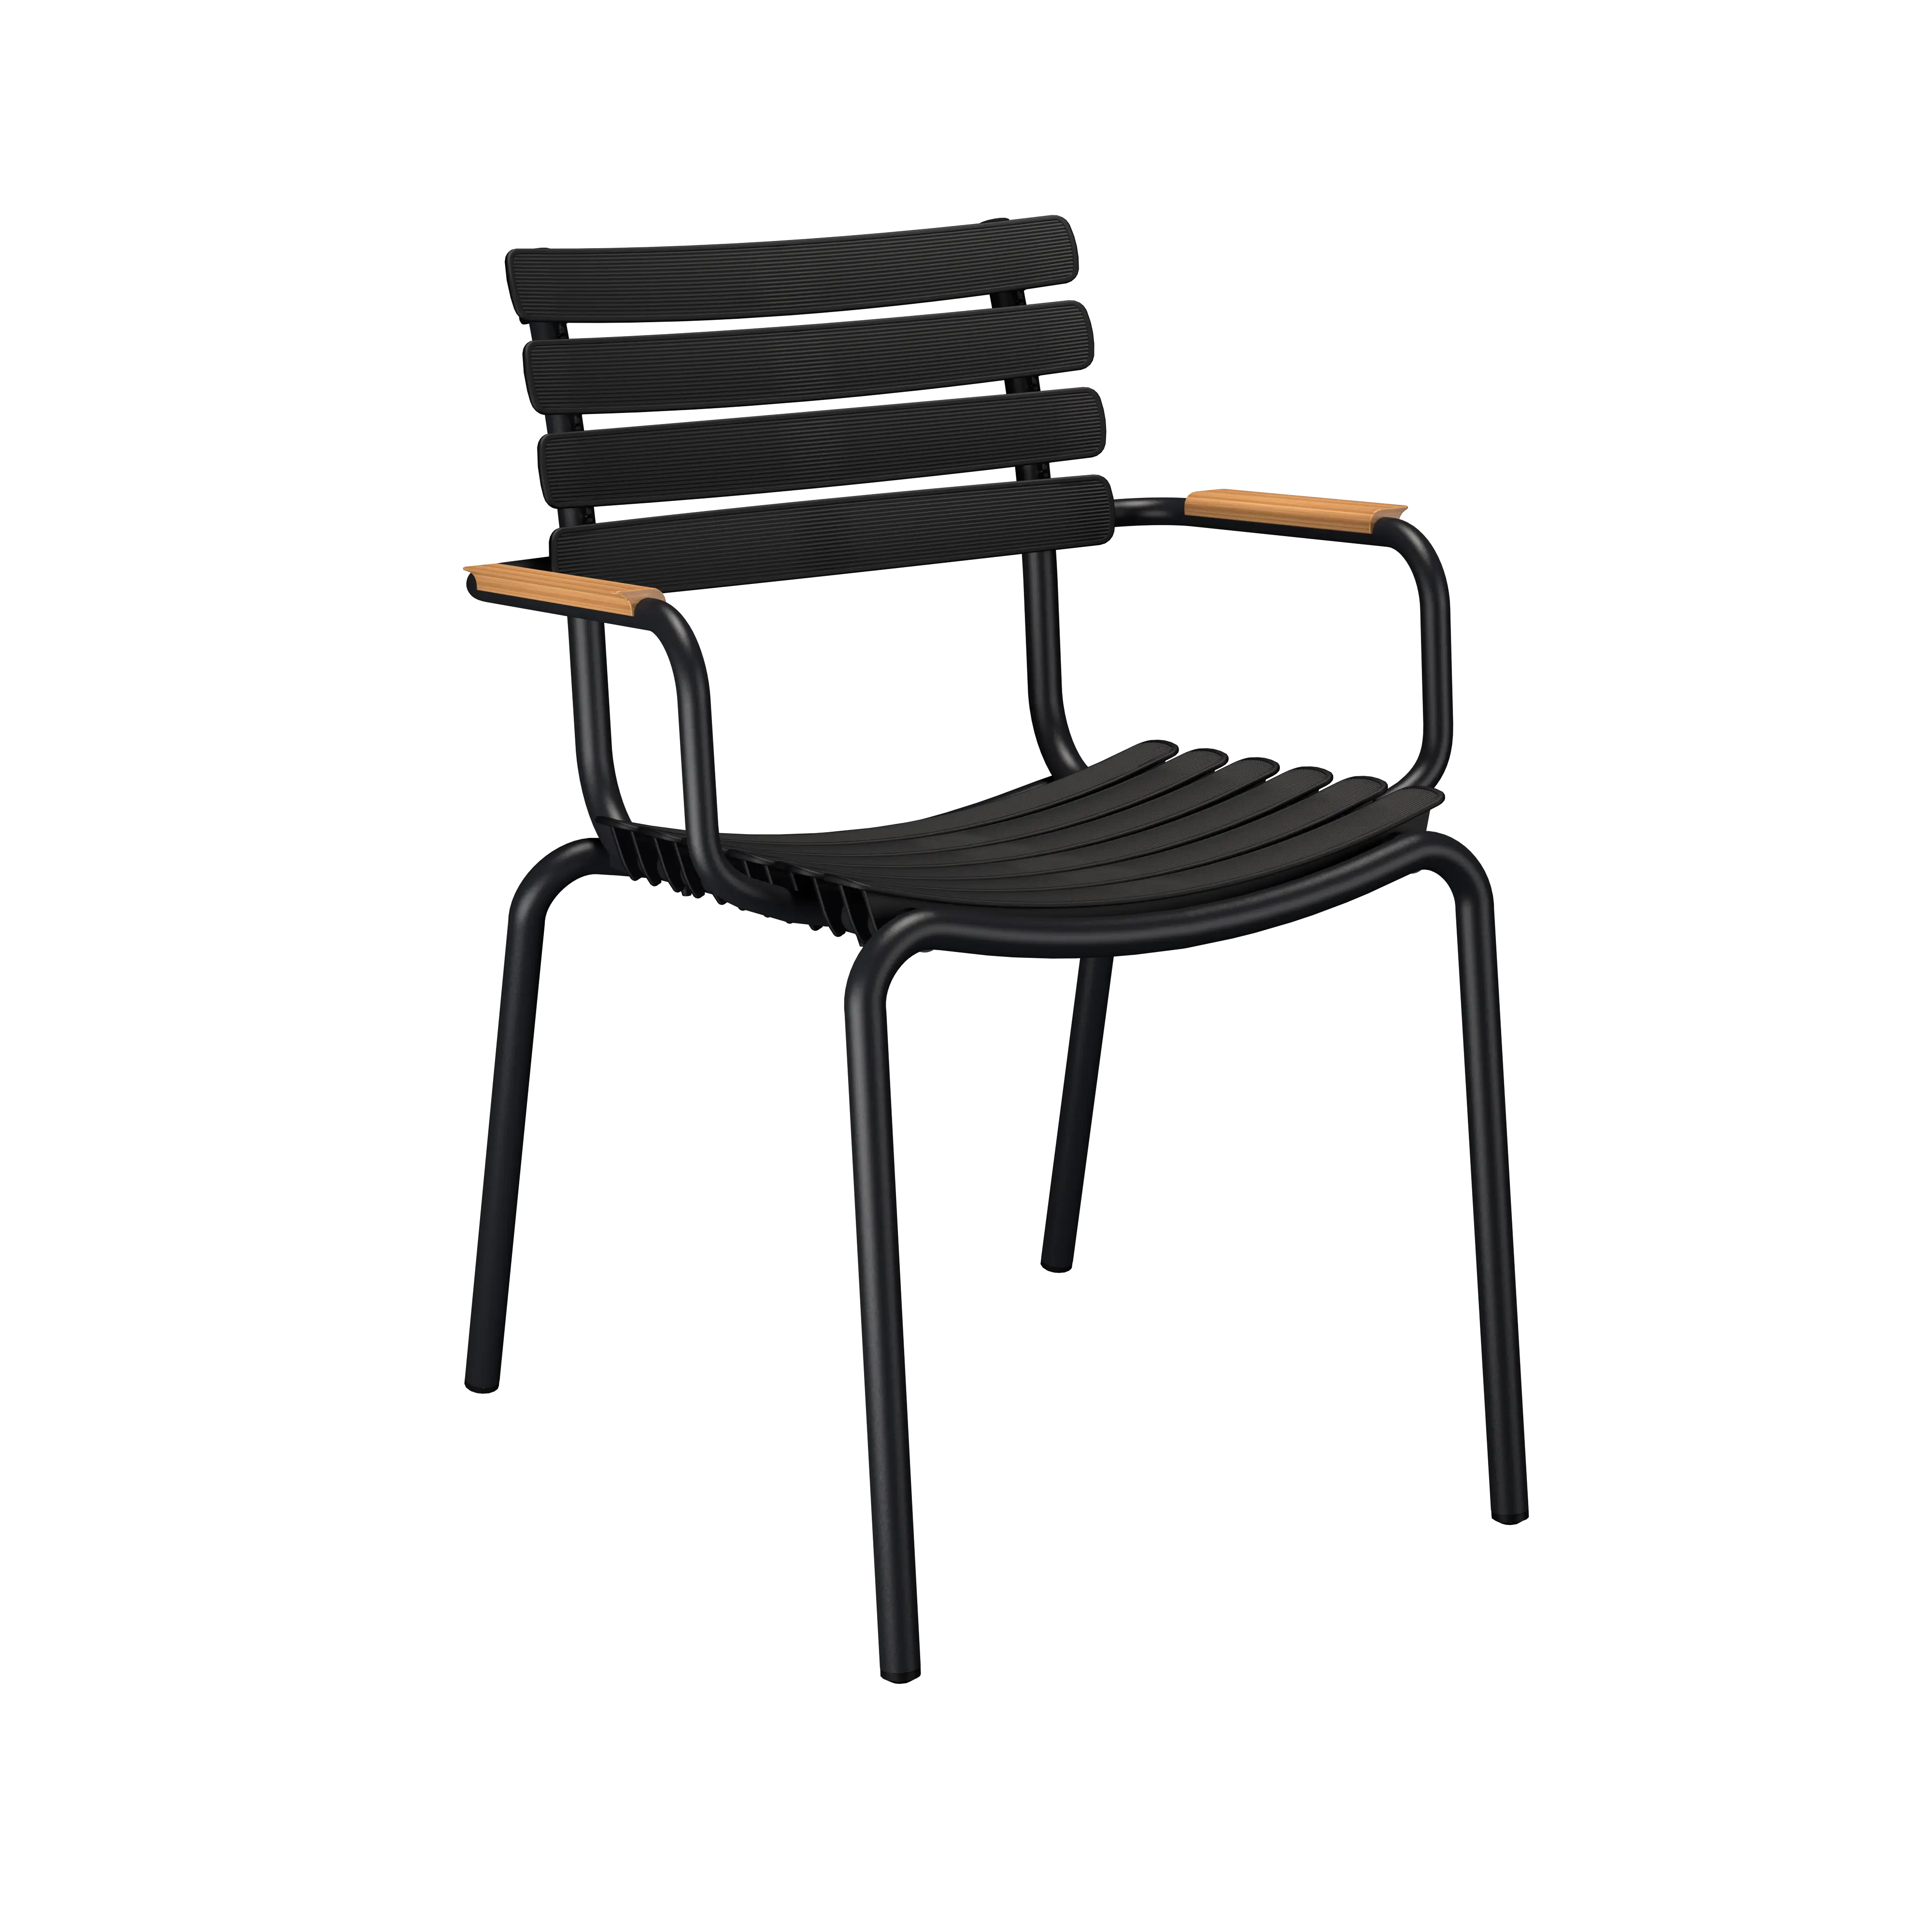 Reclips dining chair - Black, bamboo armrests